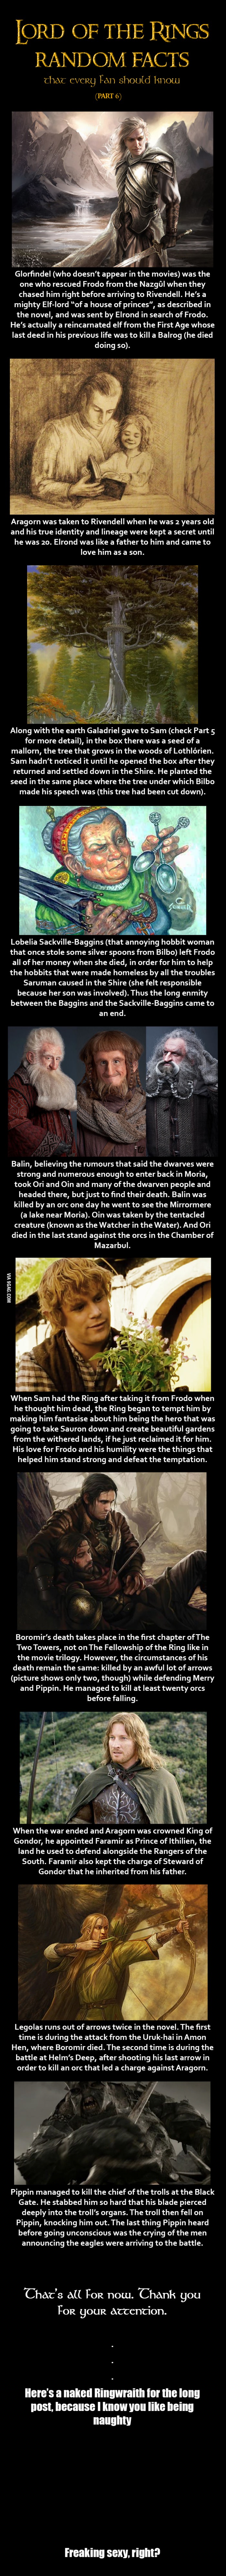 Lord of the Rings Random Facts Part 6